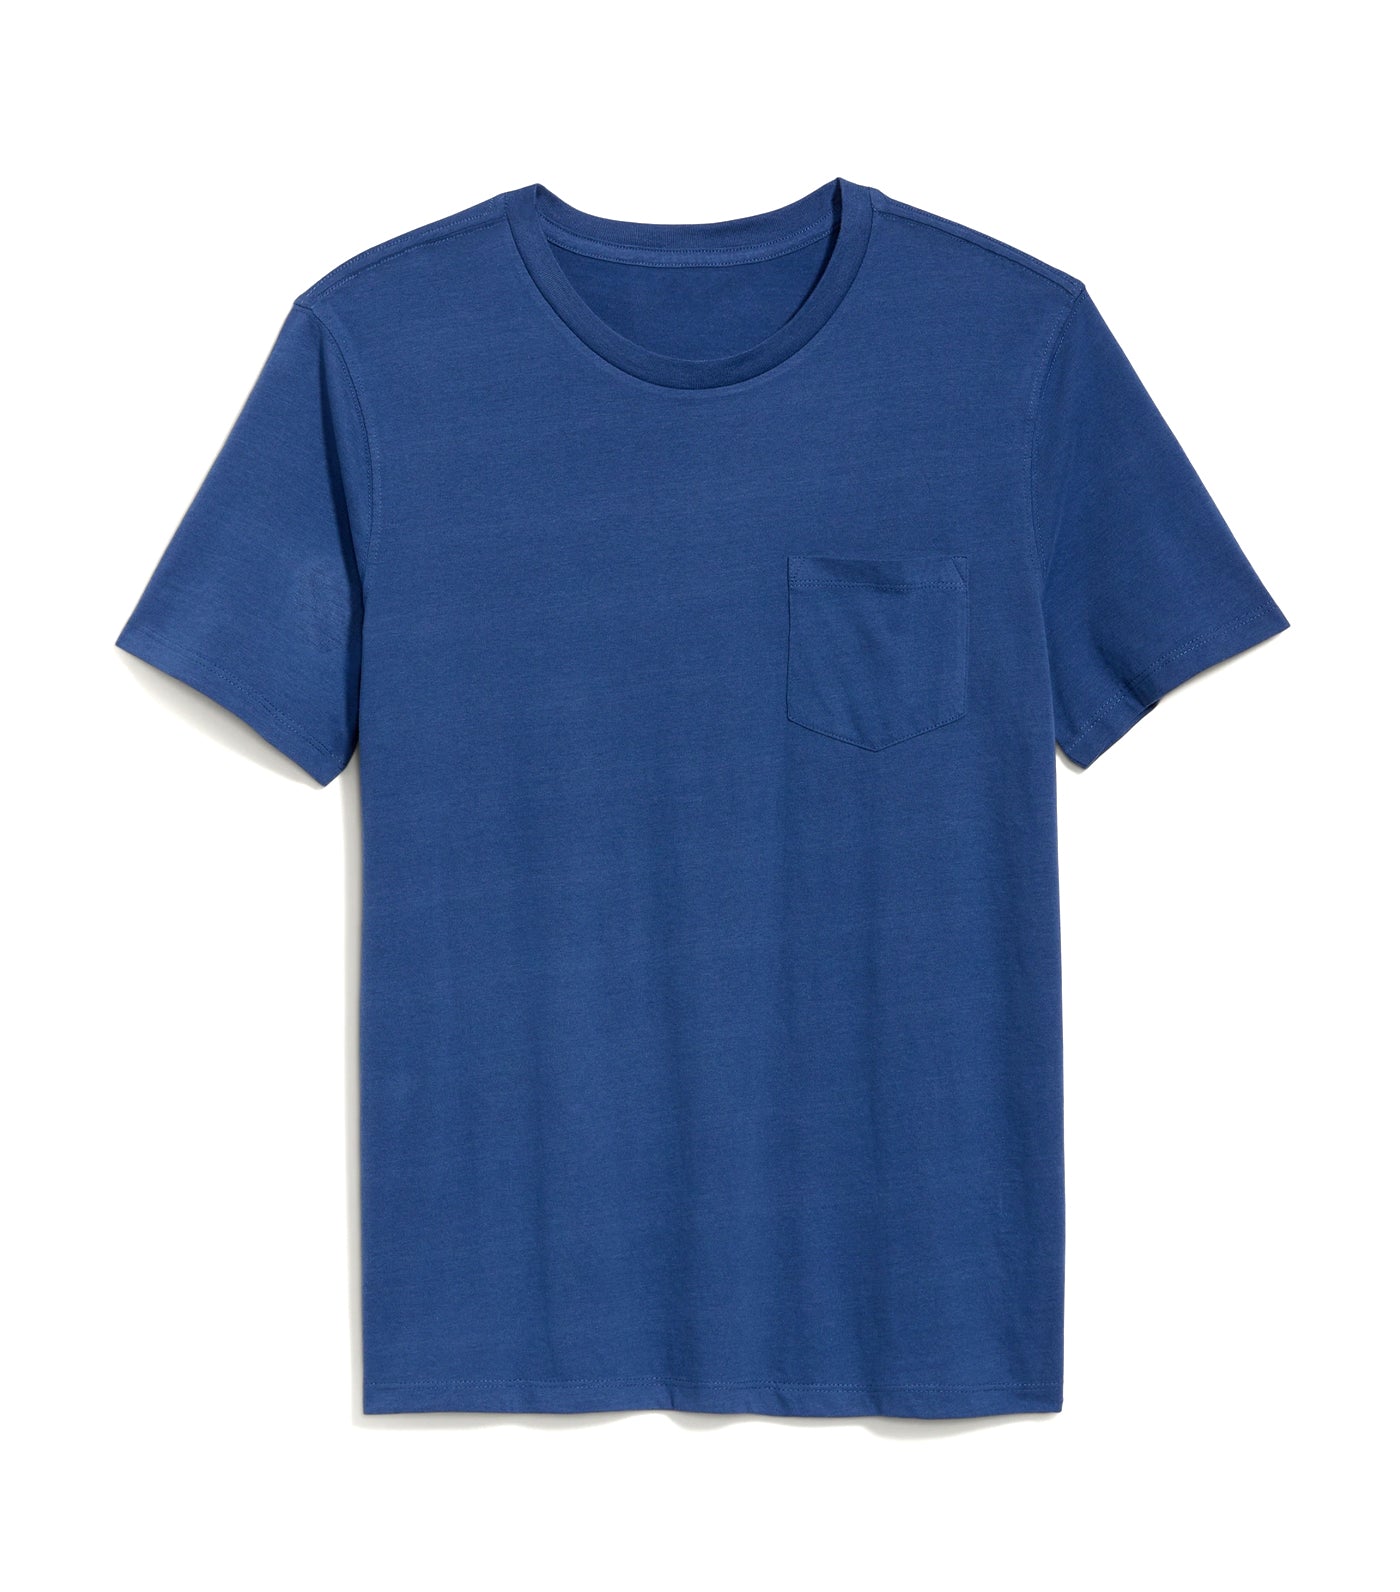 Soft-Washed Chest-Pocket Crew-Neck T-Shirt for Men Mariana Trench